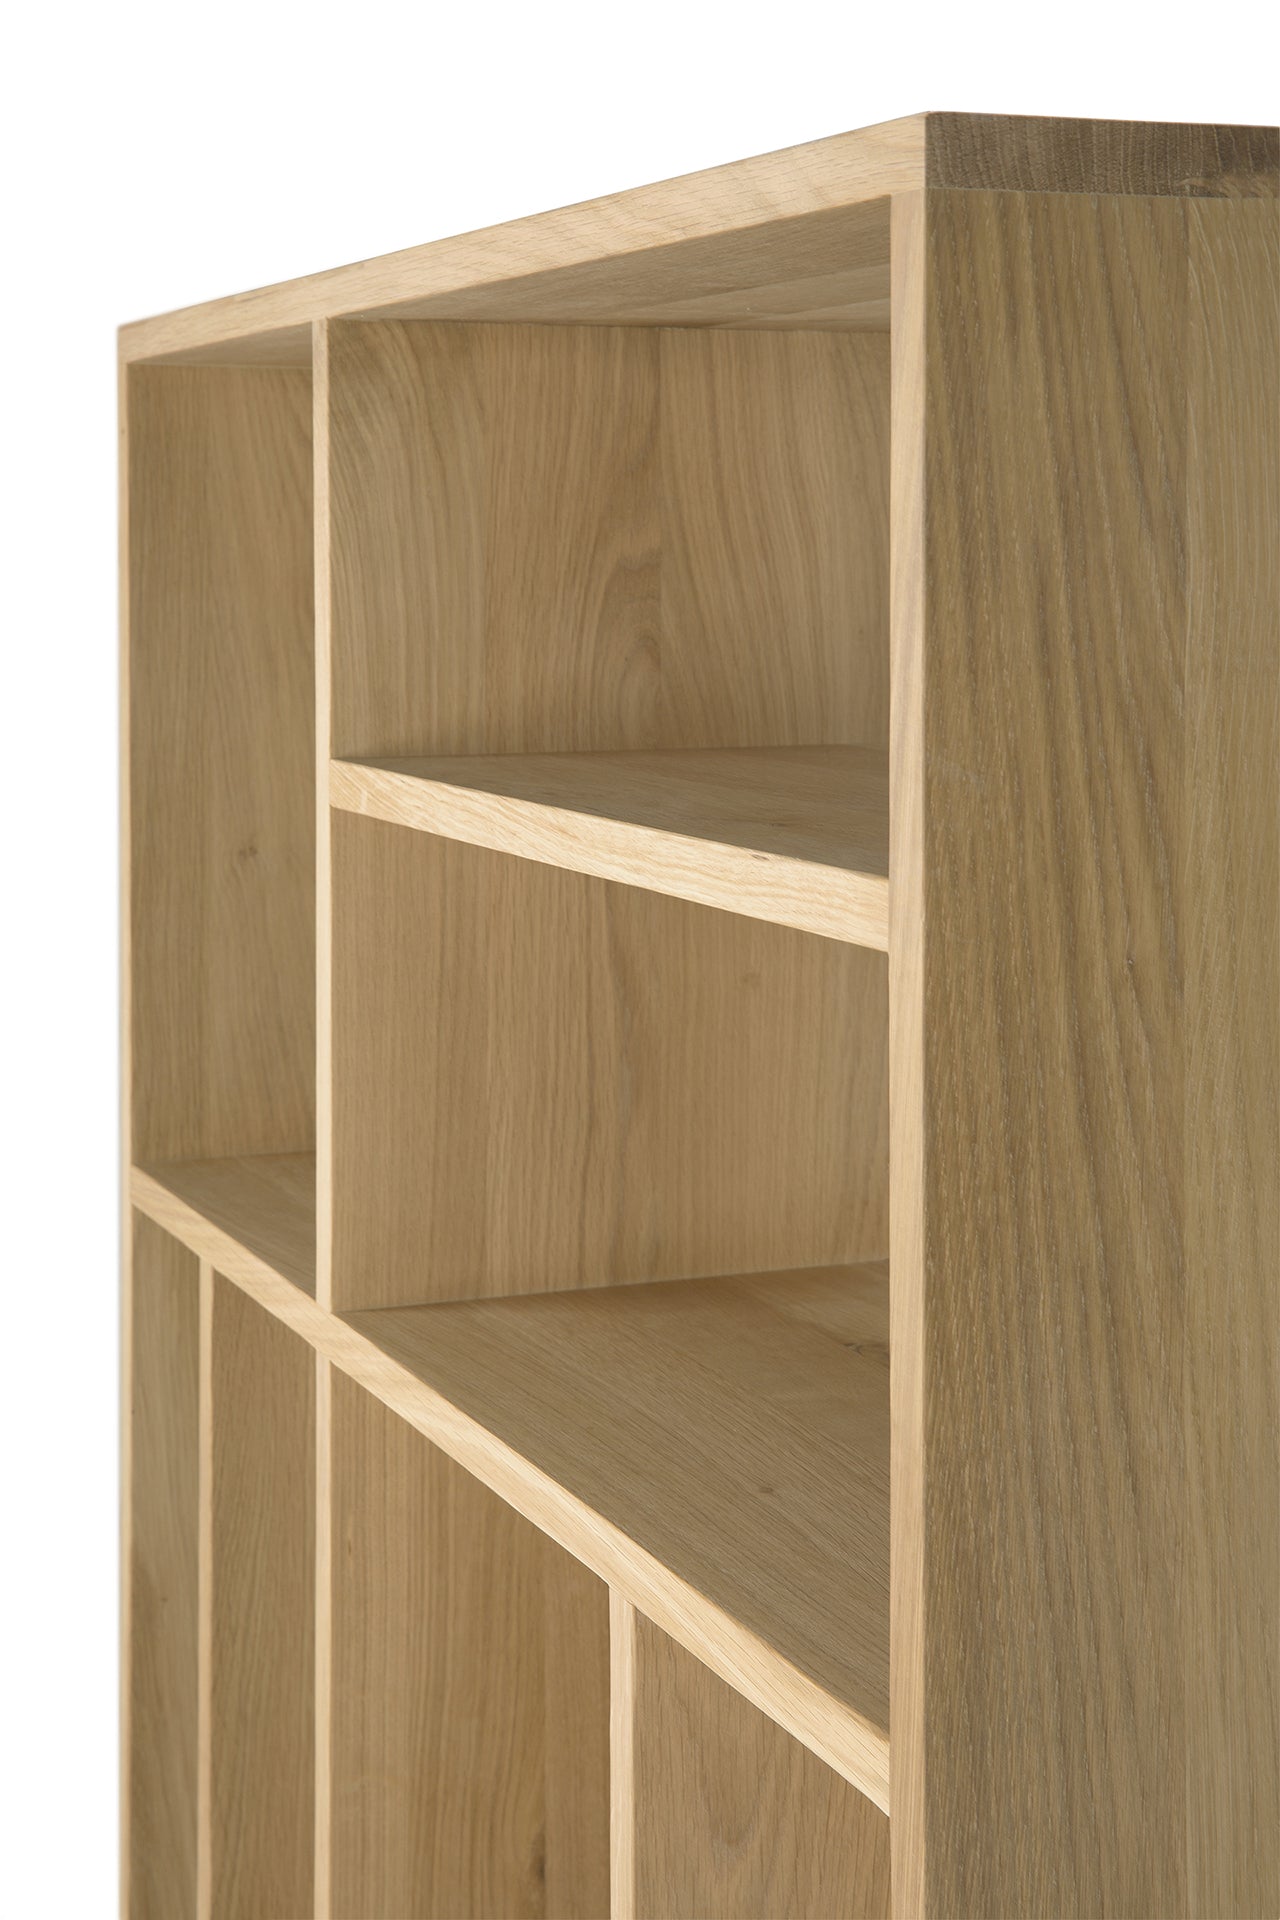 Ethnicraft Oak M Rack available from Make Your House A Home, Bendigo, Victoria, Australia